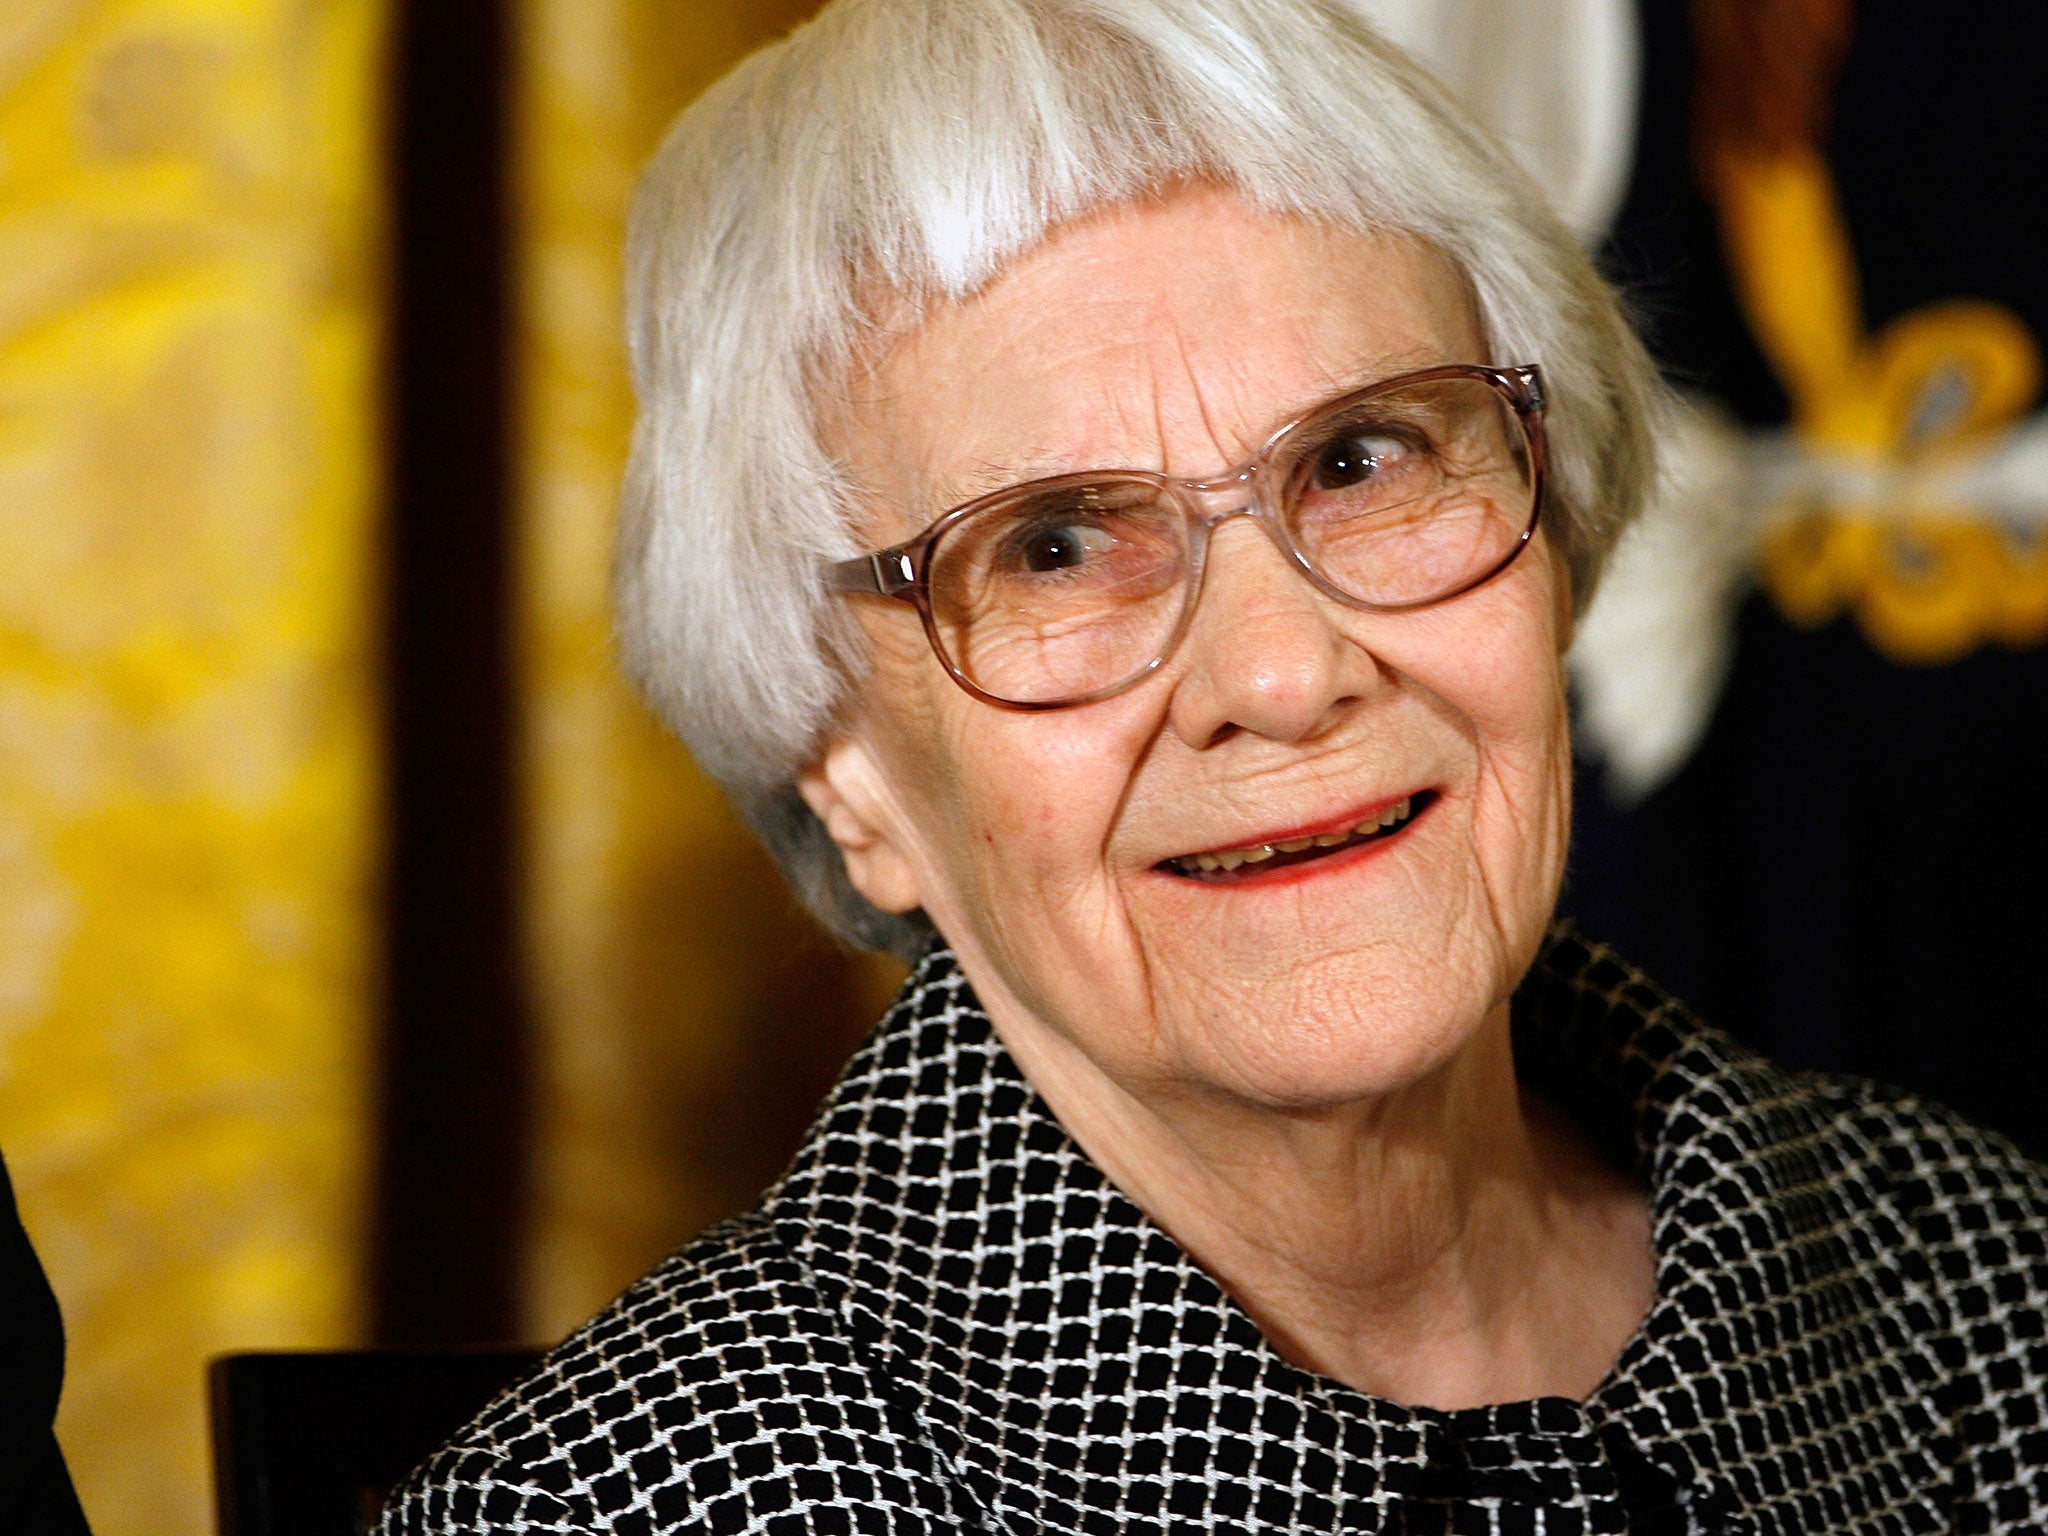 To Kill a Mockingbird author Harper Lee is suing her hometown museum for the unauthorised use of her name